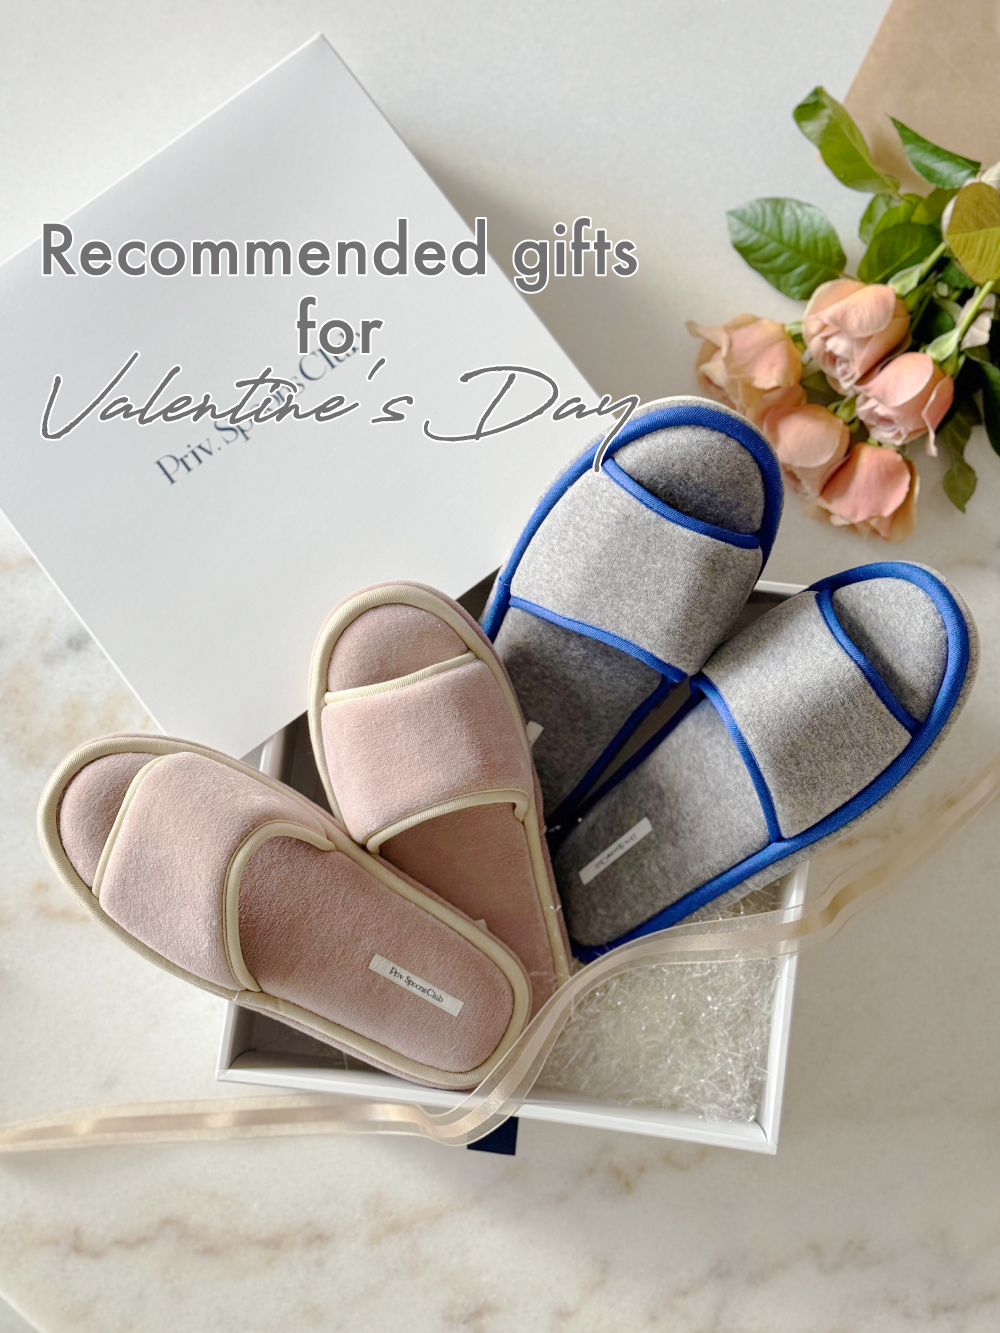 Recommended gifts for Valentine's Day